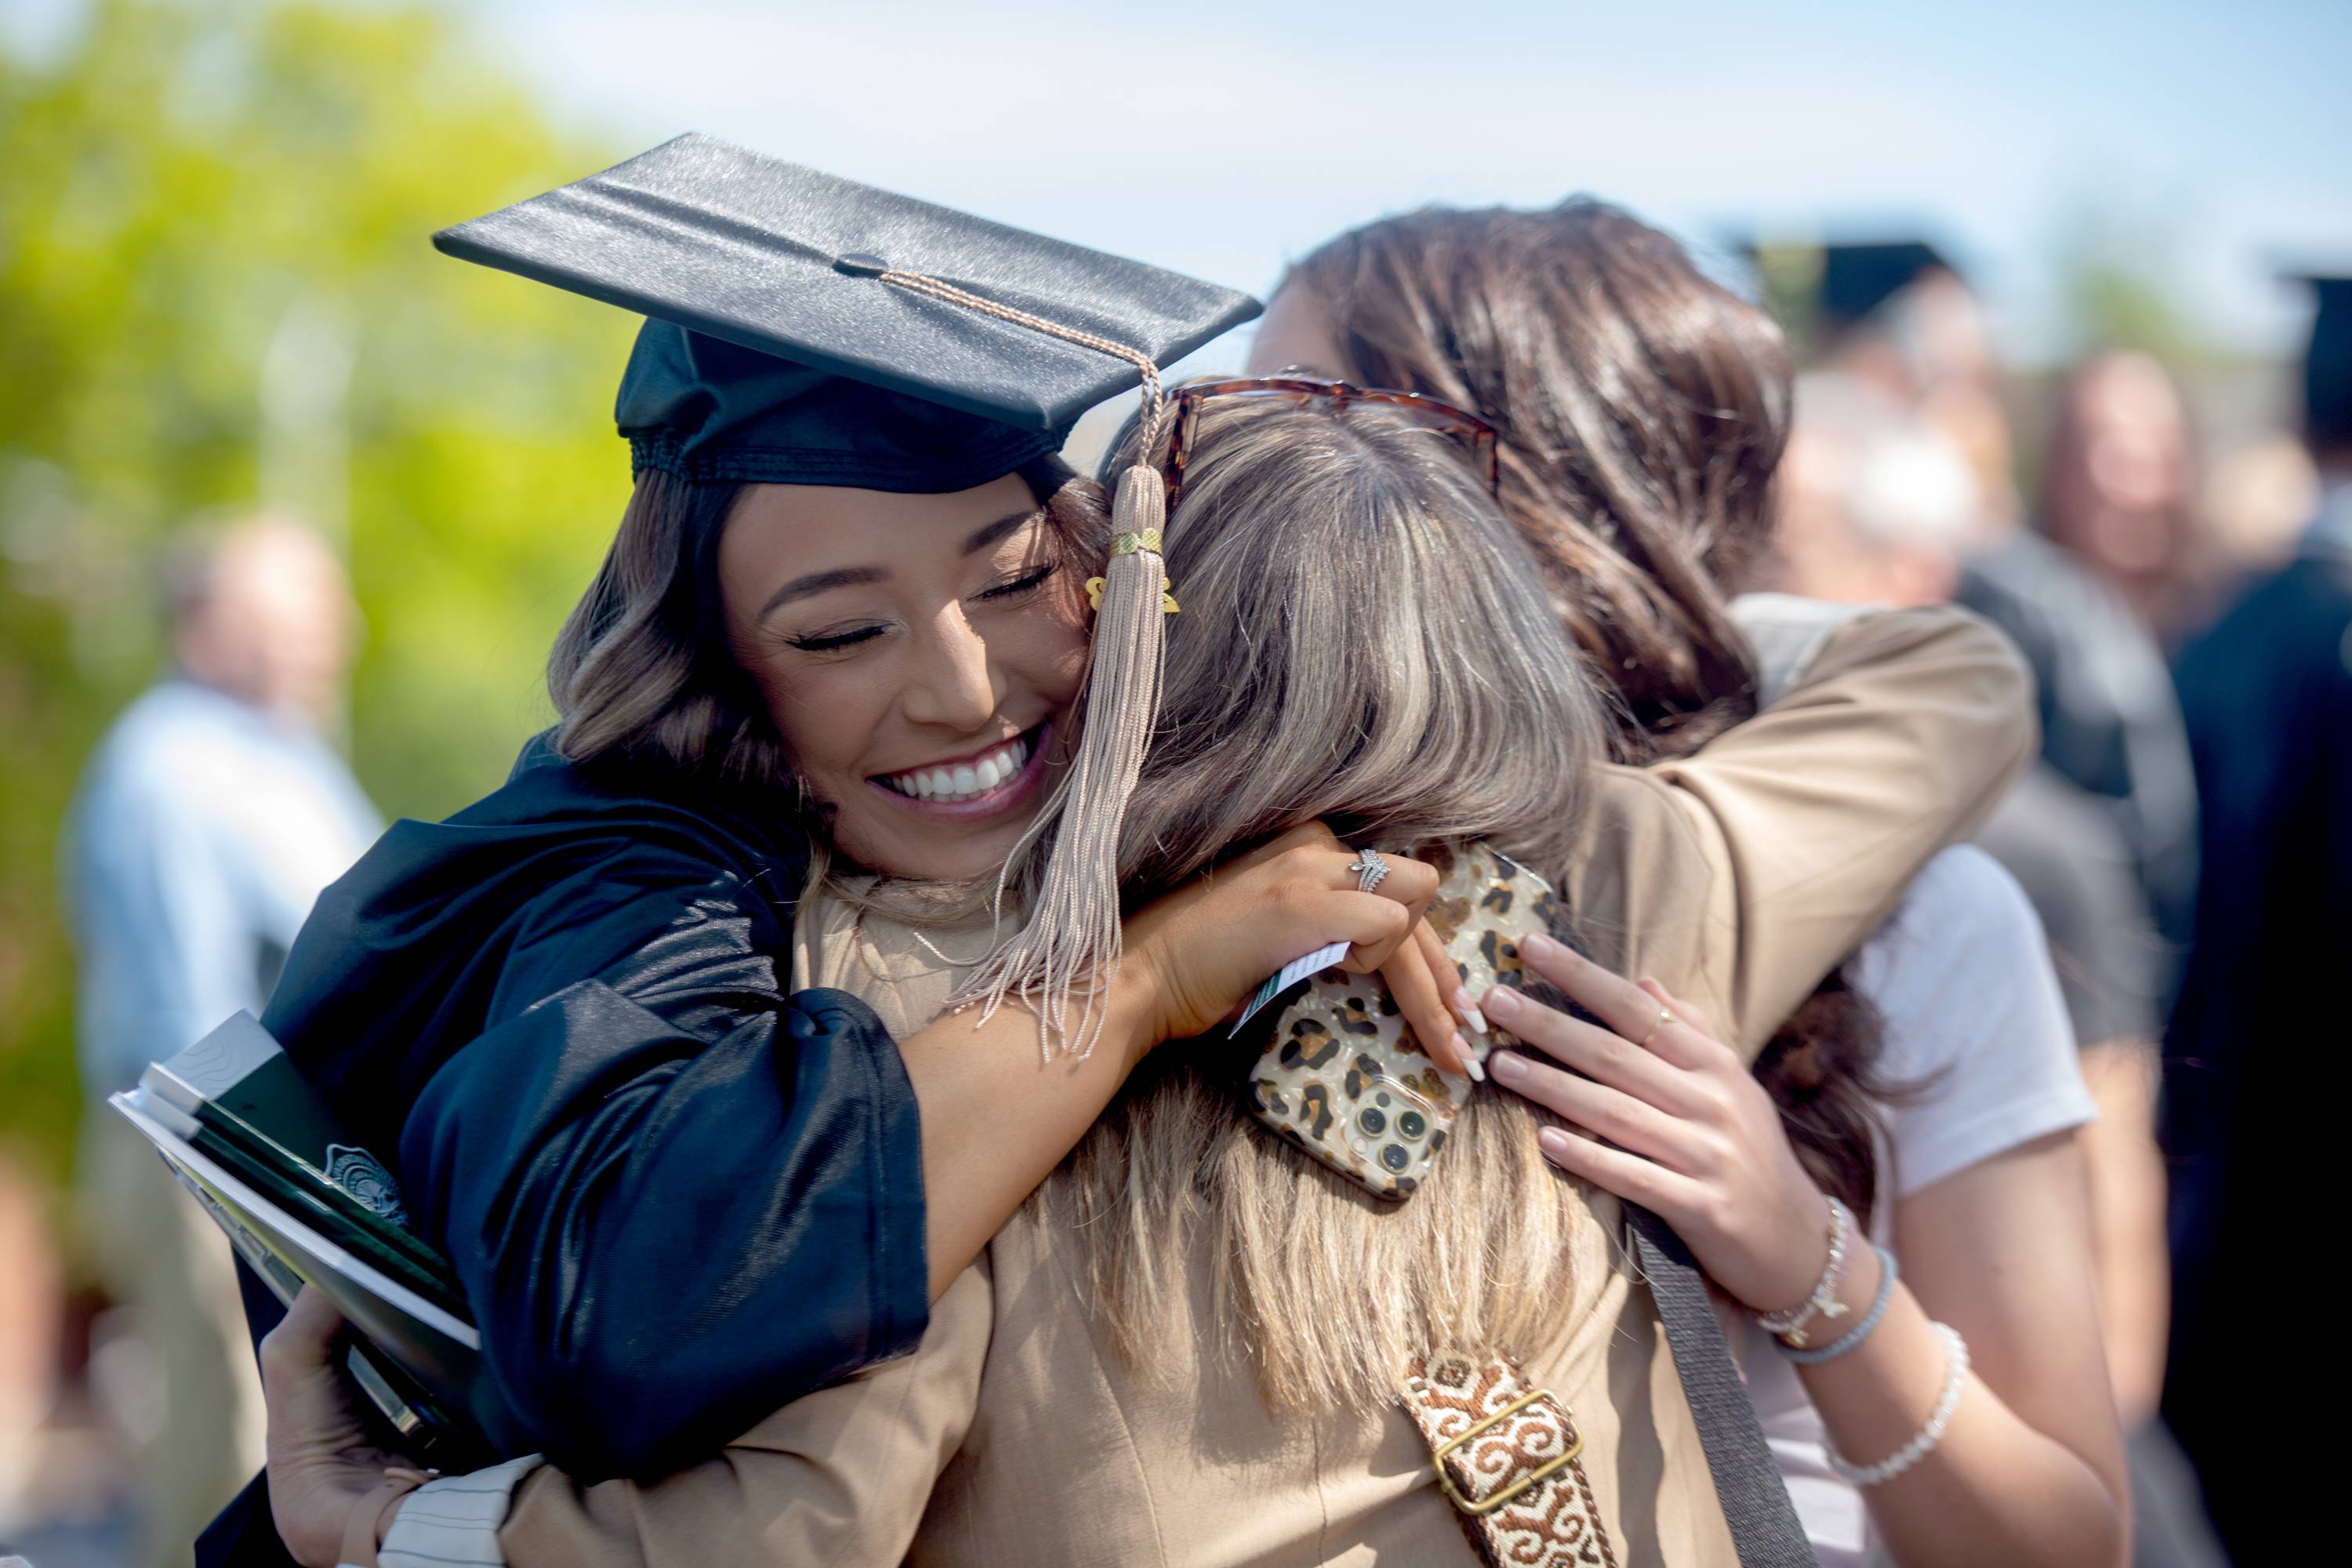 The day was filled with hugs, handshakes and lifelong memories for thousands of proud Ohio University graduates.